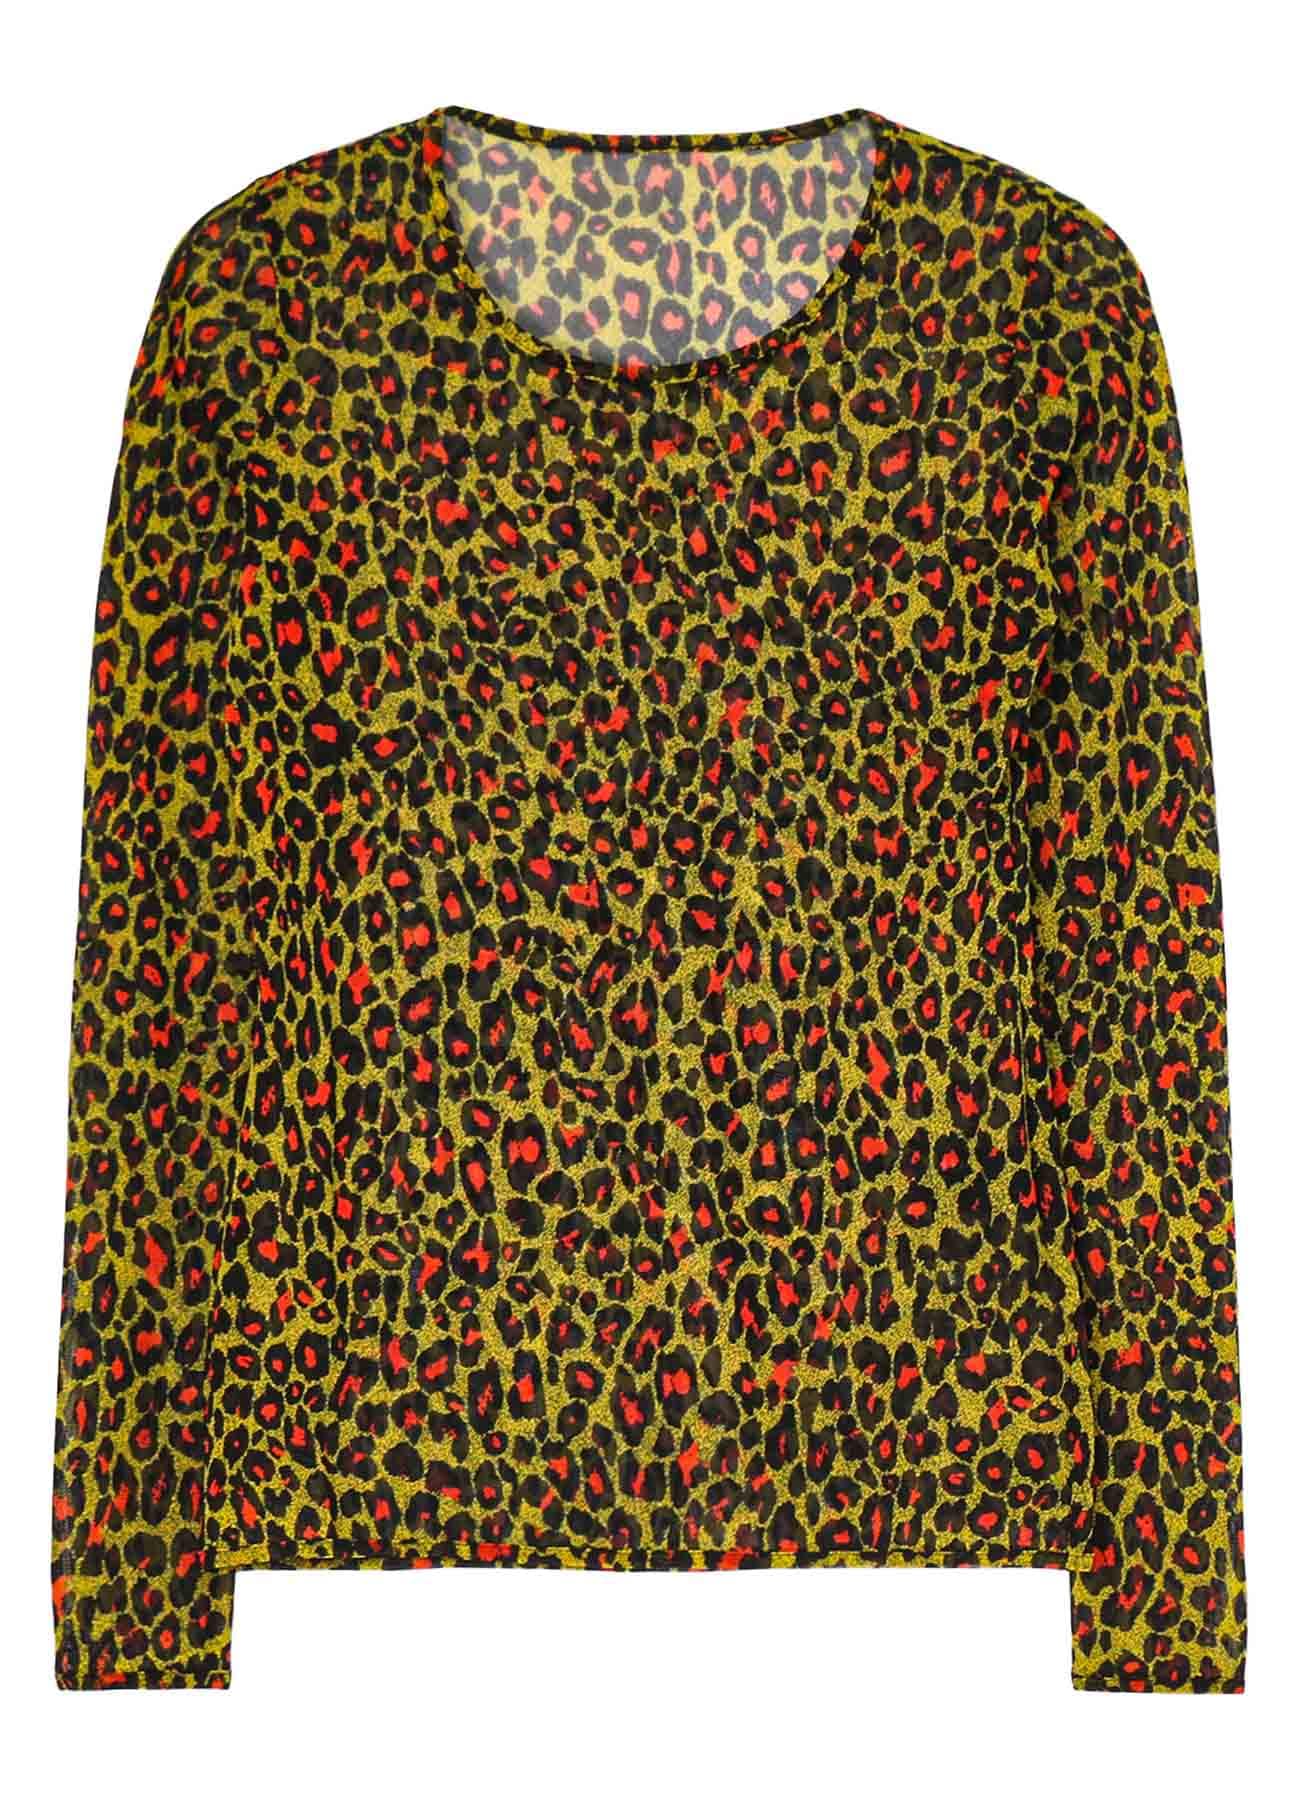 LEOPARD TULLE COMPACT LONG T-SHIRT